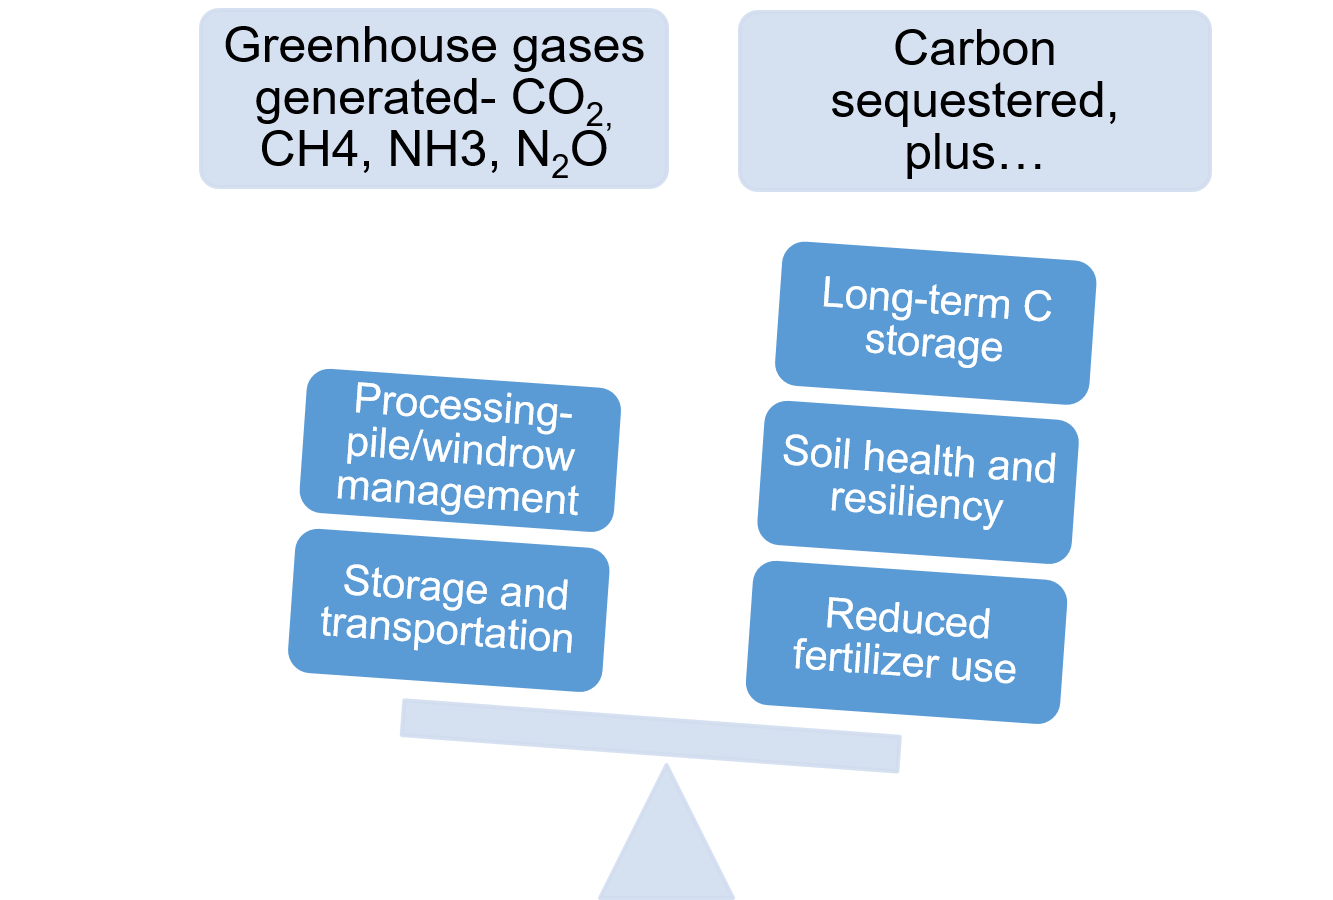 composting sequesters carbon dioxide more so that contributing greenhouse gases